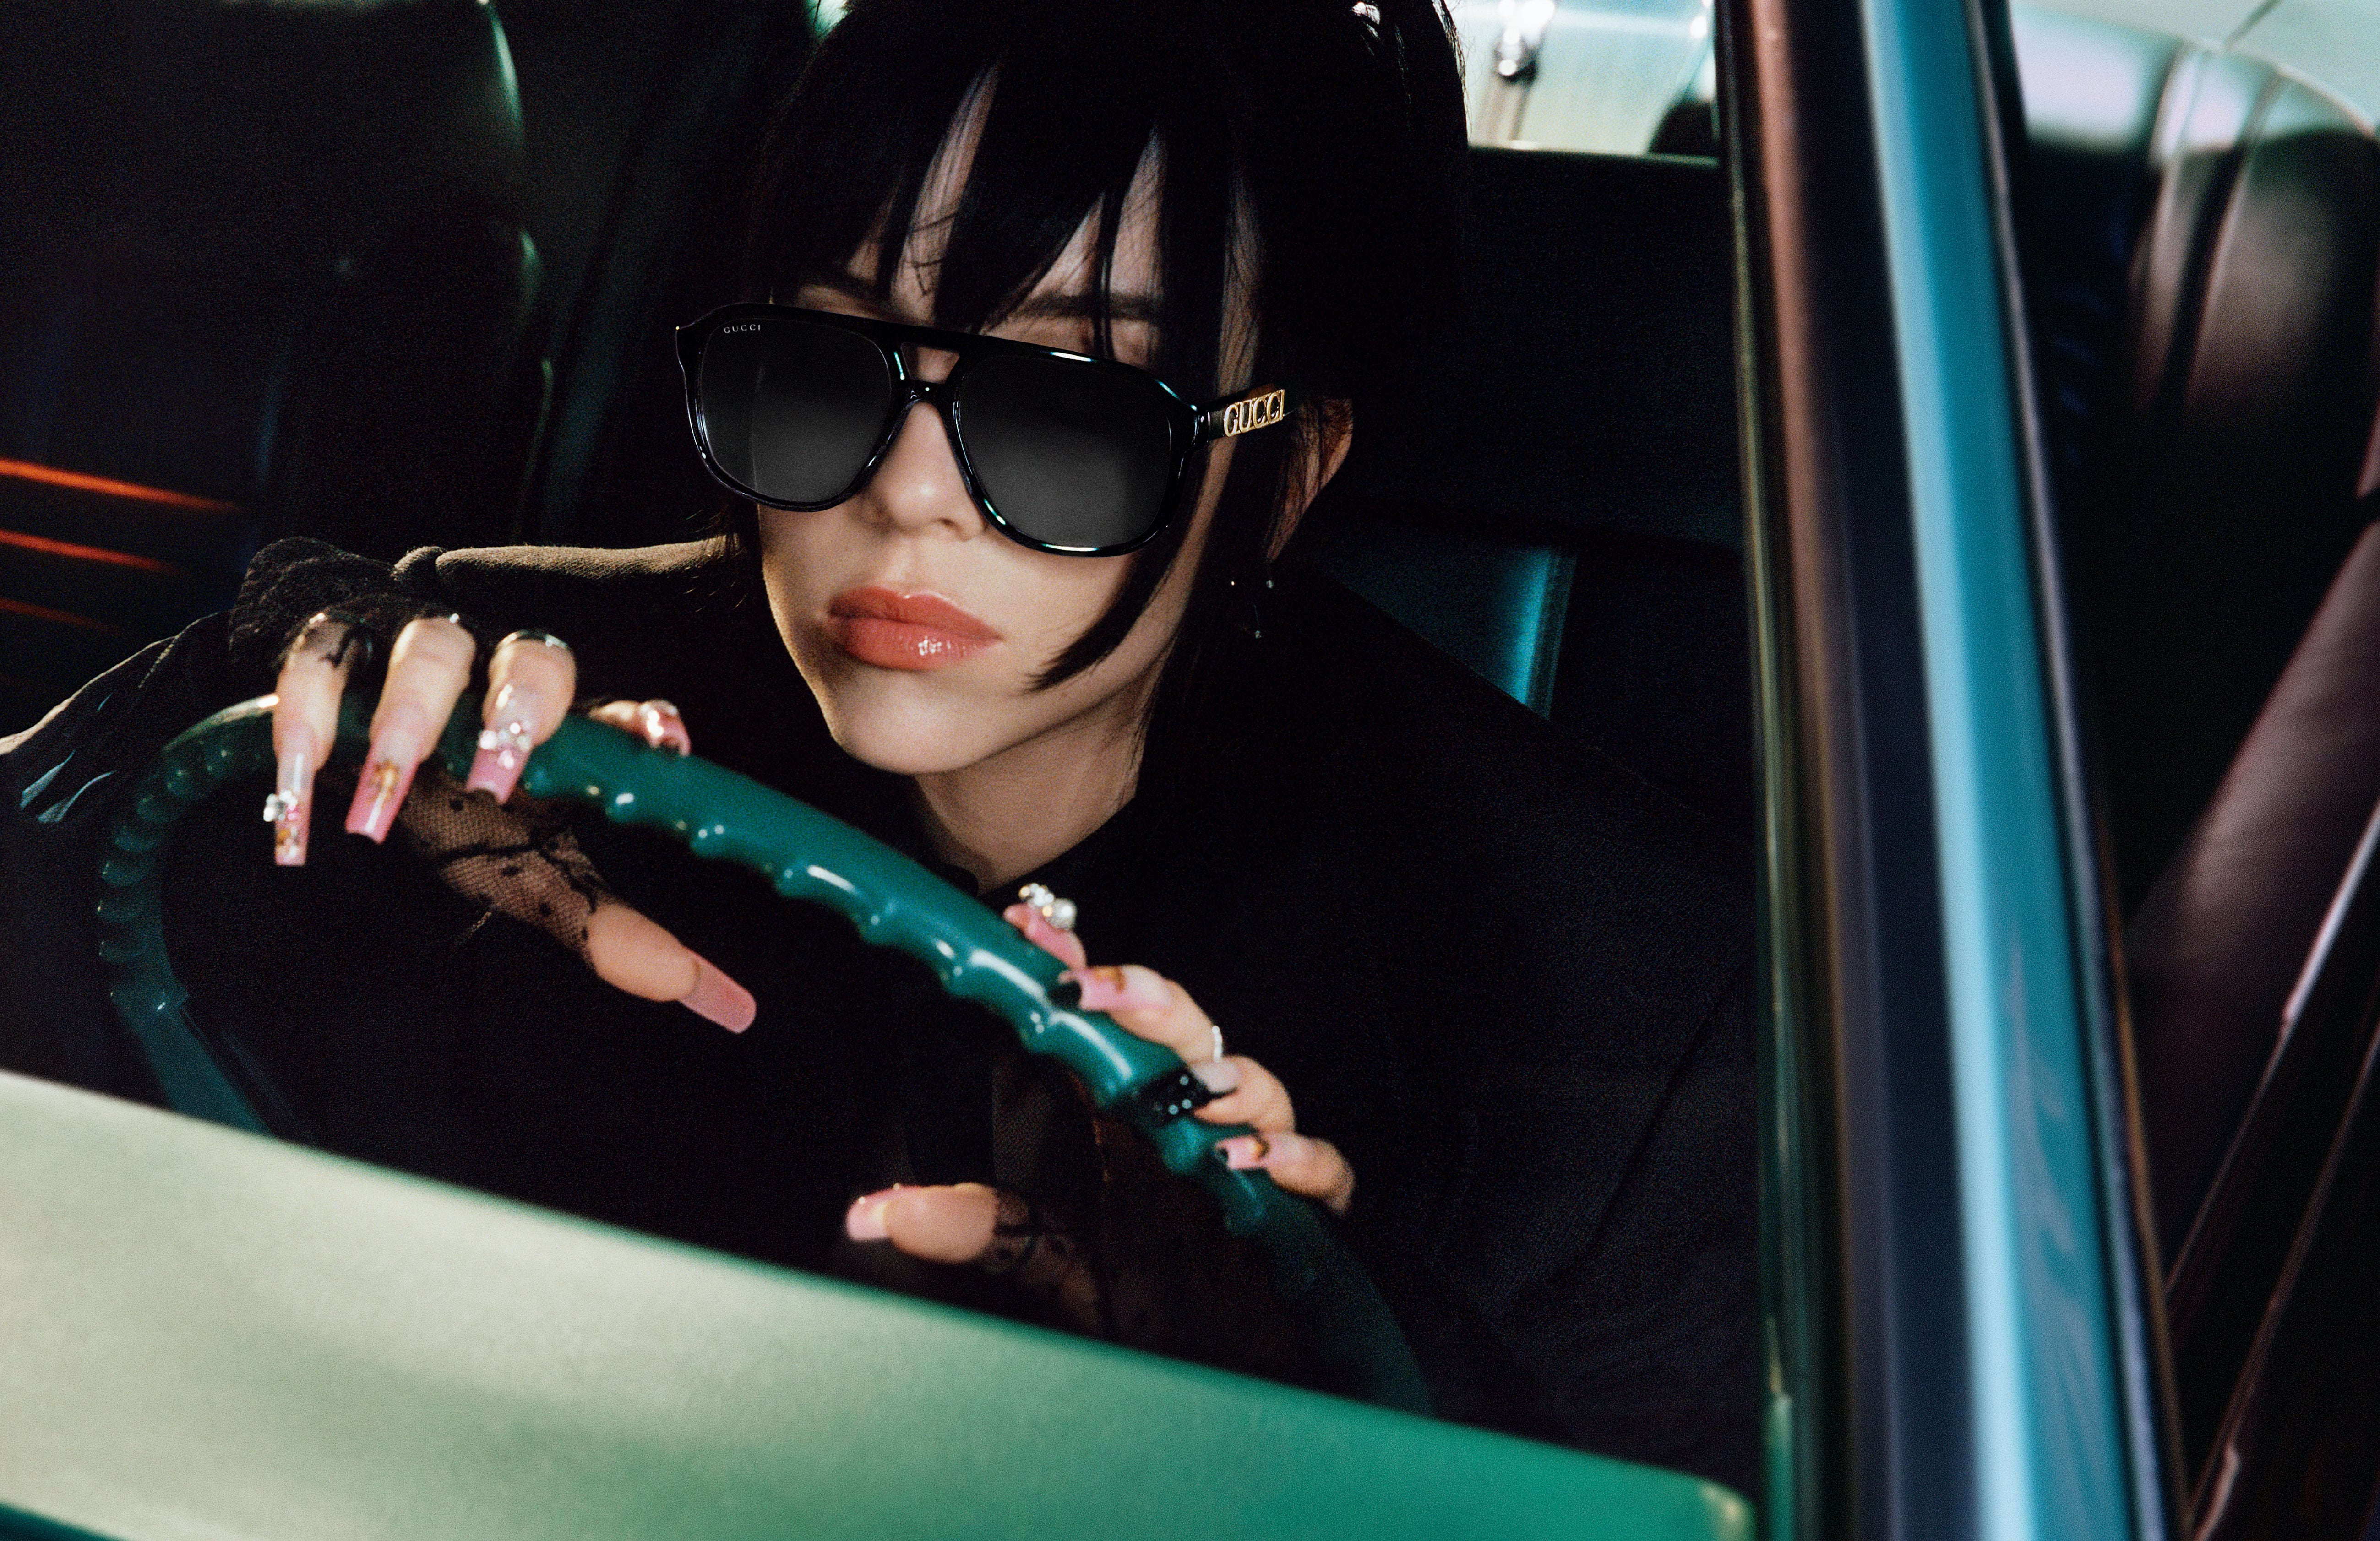 Louis Vuitton 2019 In The Mood For Love Sunglasses - Black